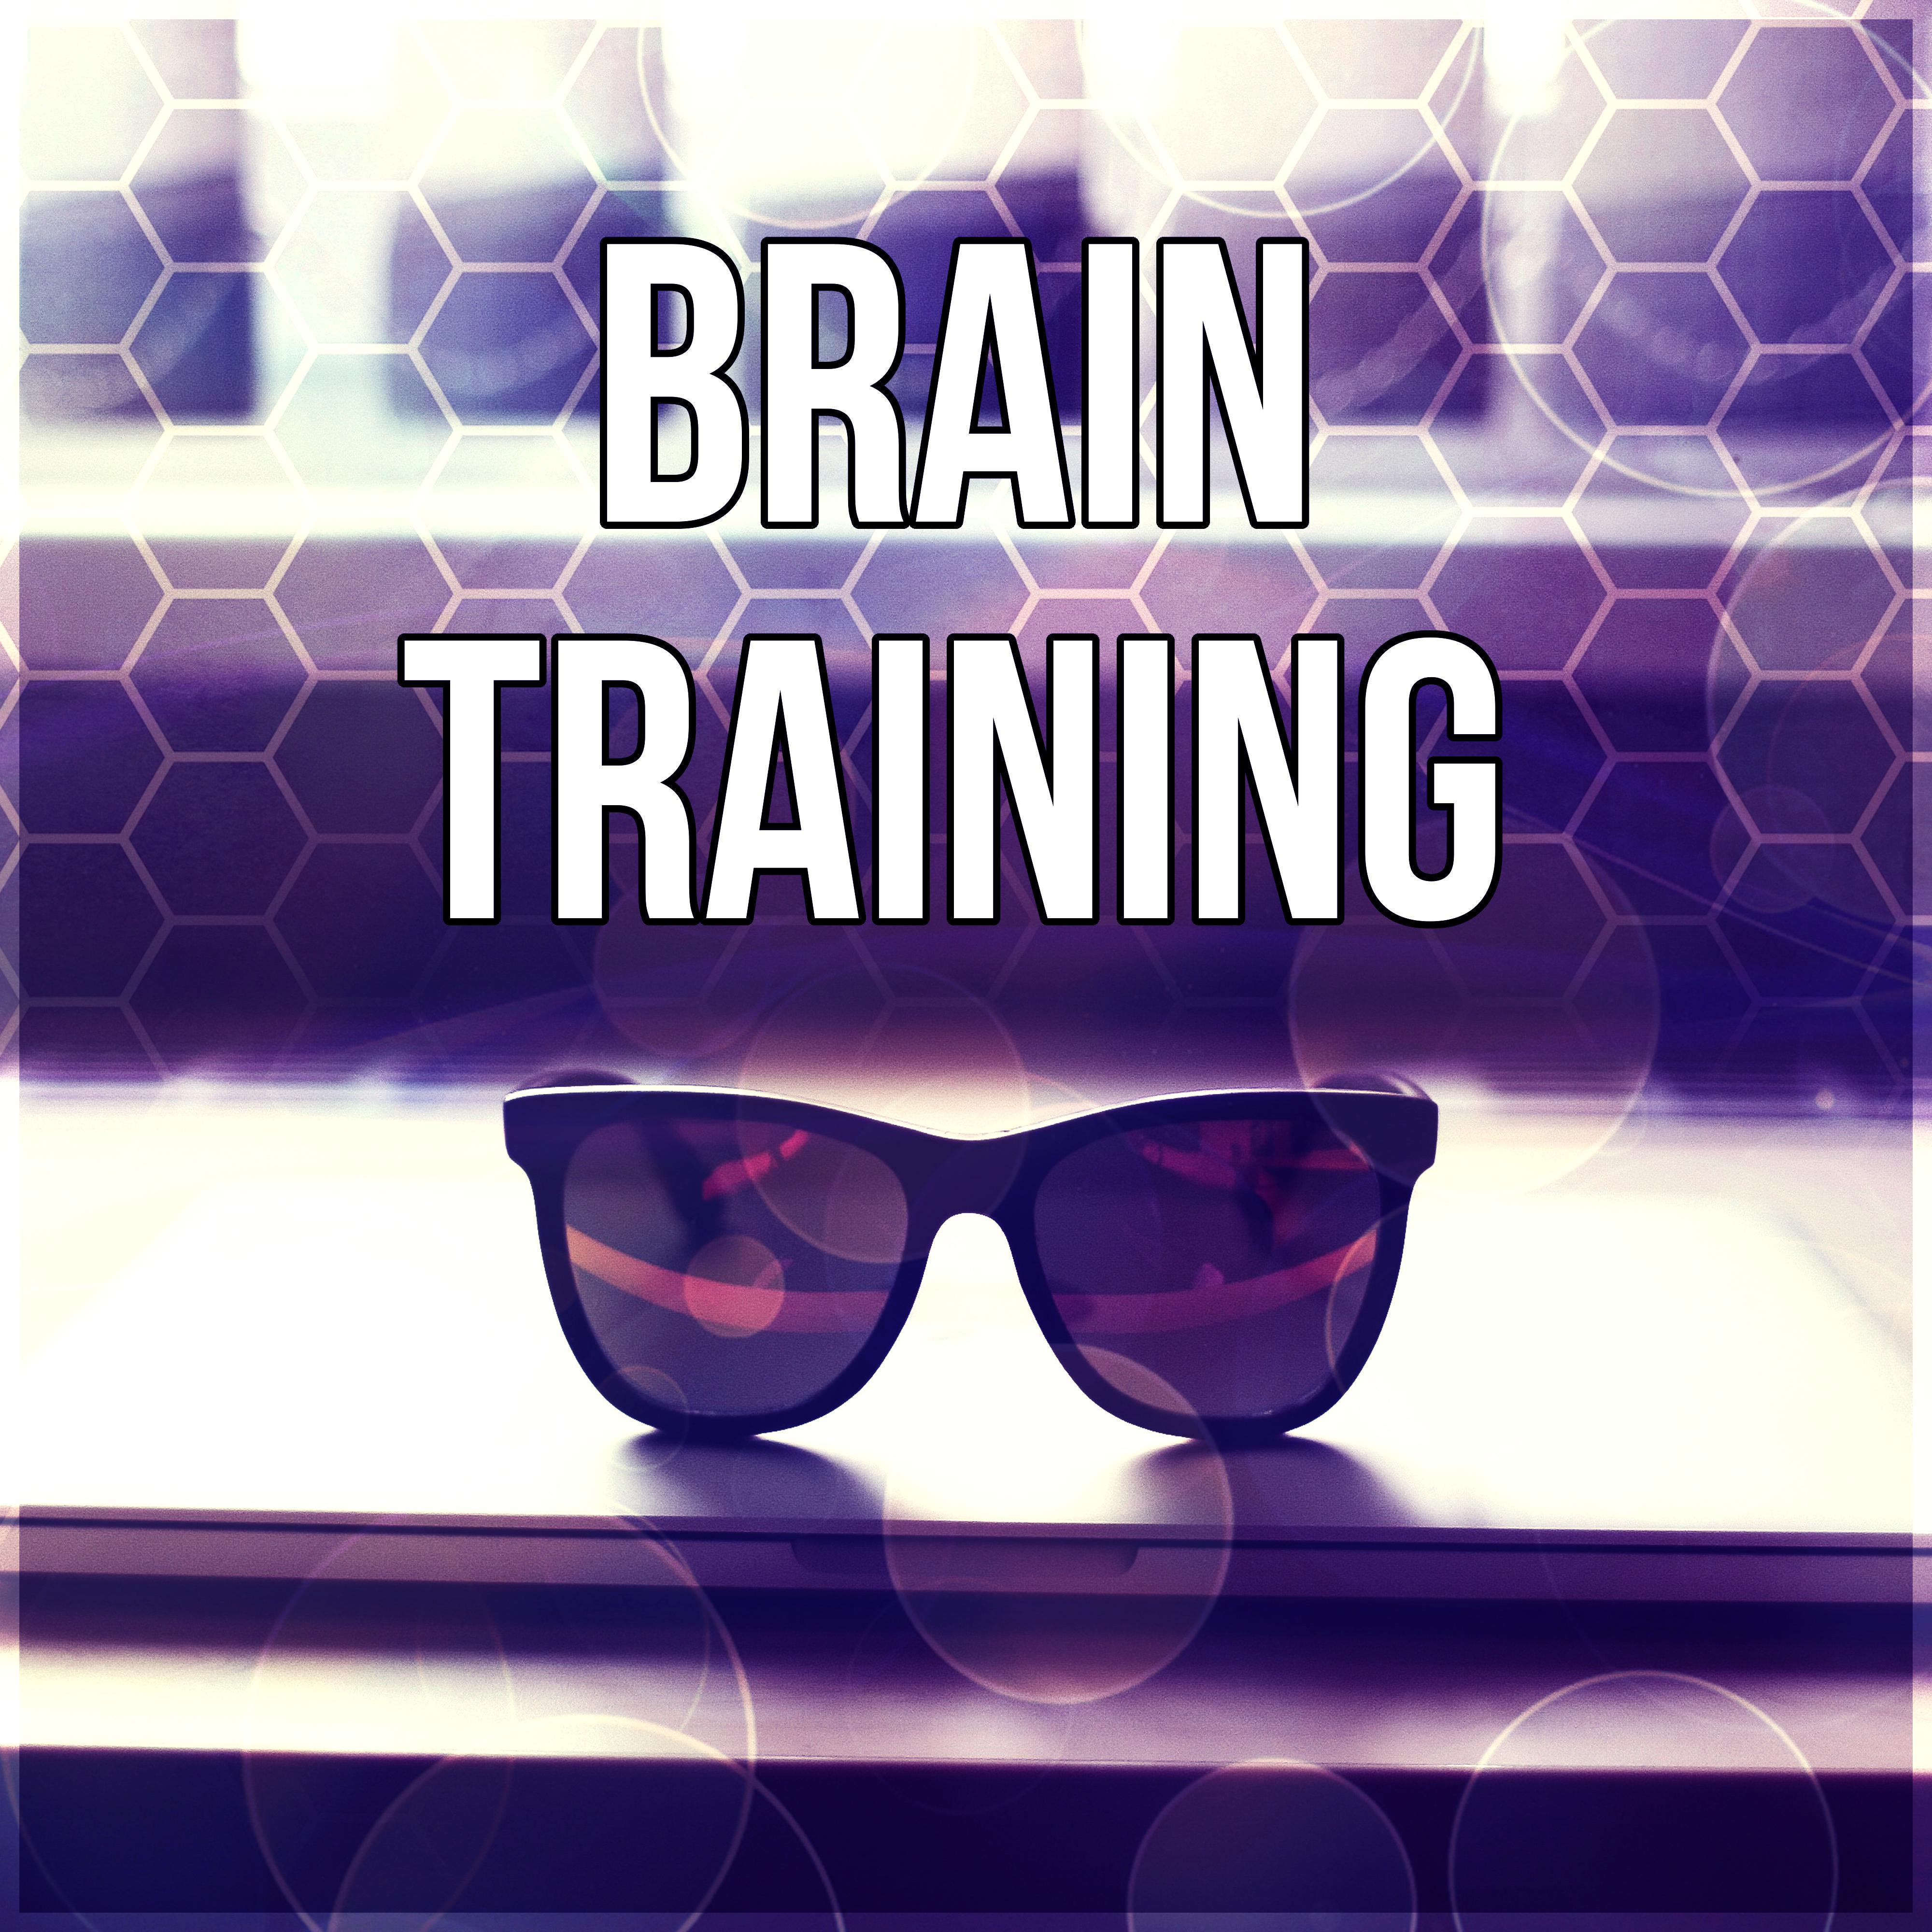 Brain Training  Study Music Playlist, Train Your Brain with Instrumental Music to Improve Memory, Focus  Concentration, Easy Learning